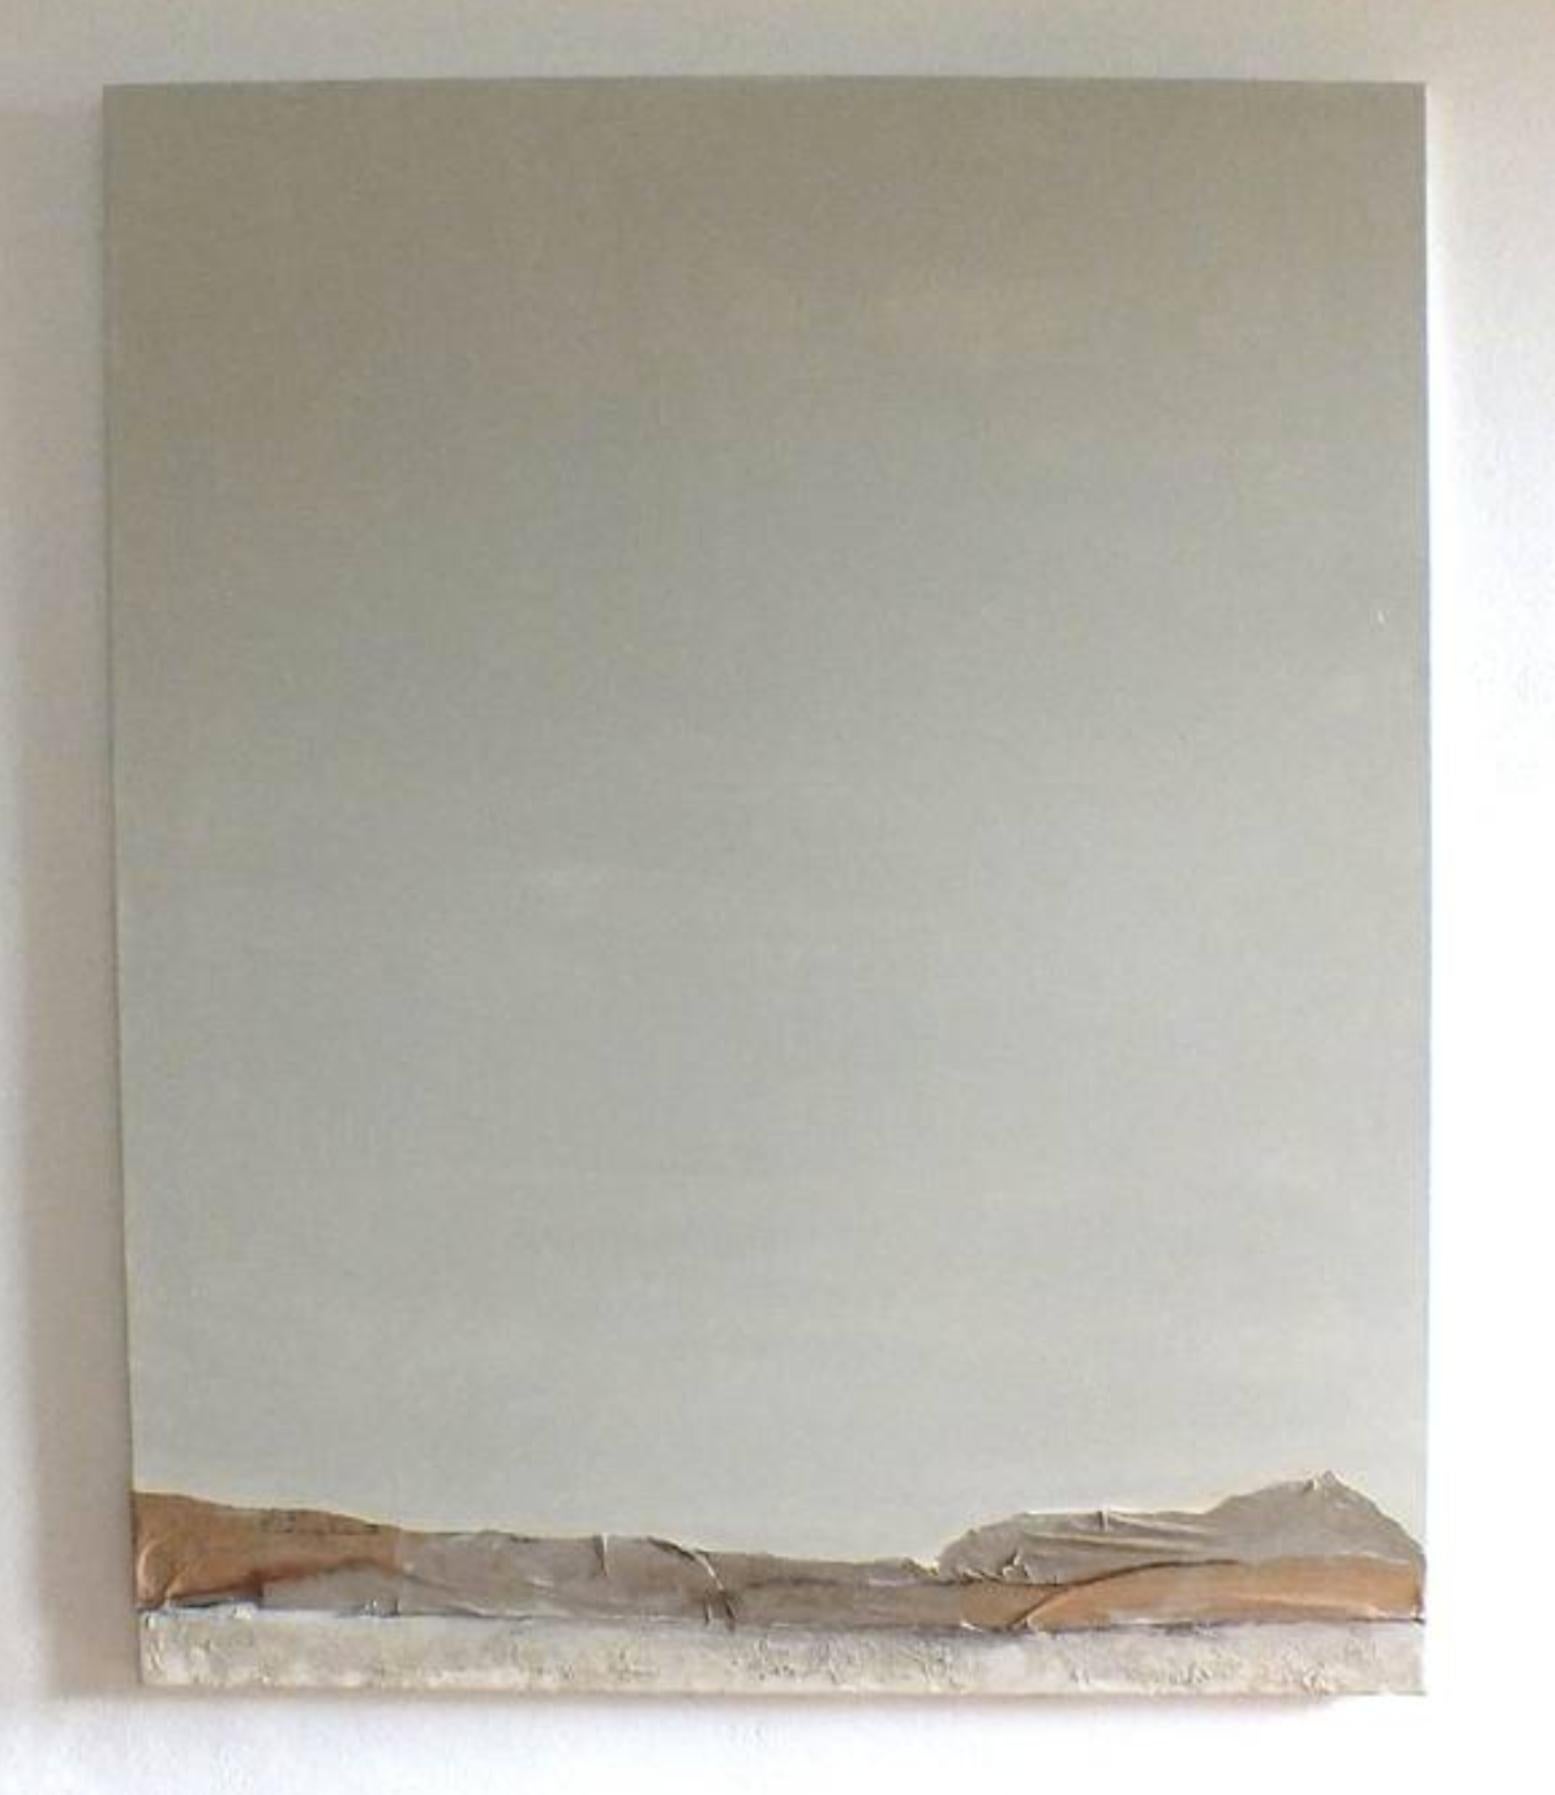 'Landscape 16' is an original minimalist abstract painting on canvas by emerging Sicilian artist - Marilina Marchica. It is a mixed media art piece which has a rich texture and authentic design. The subject is focused on Italian nature, sea views,